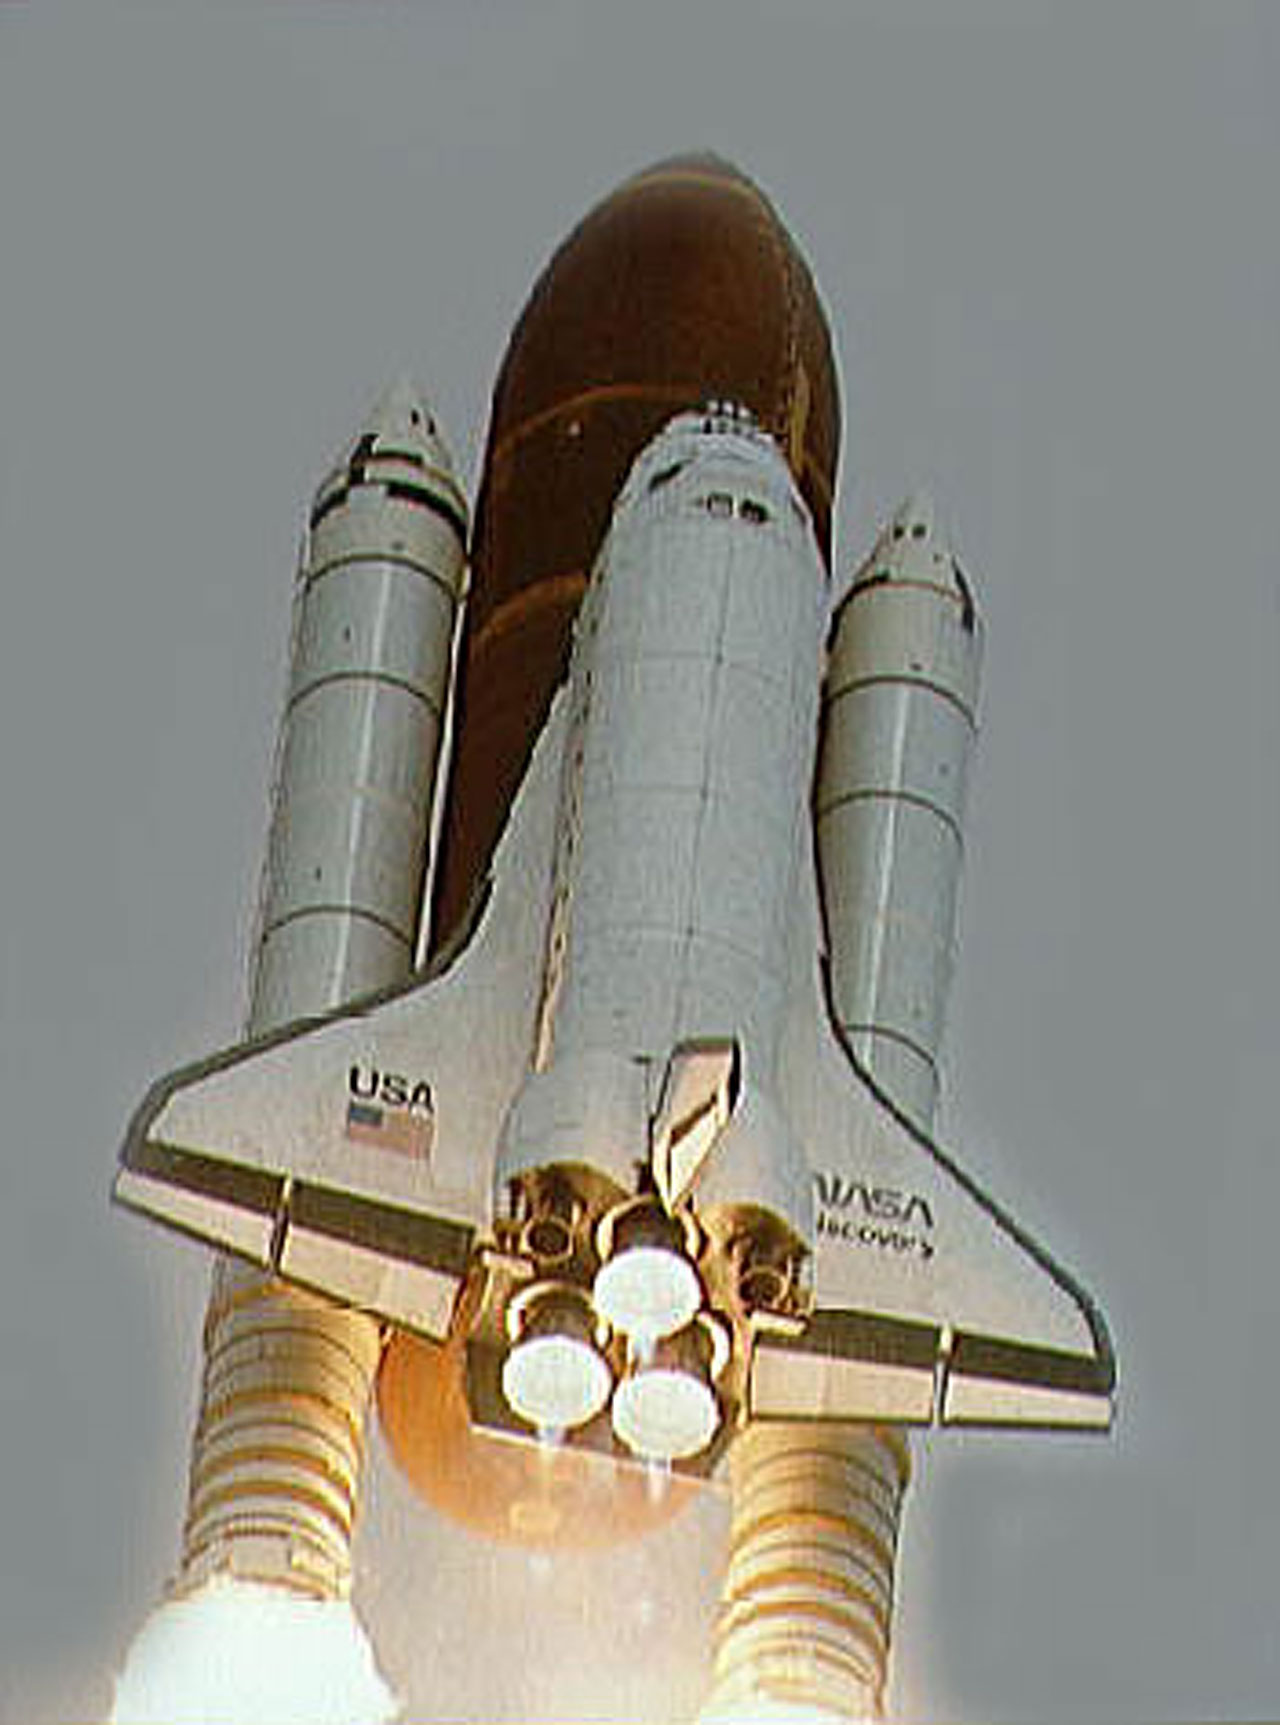 Schuttle Discovery (STS-31)